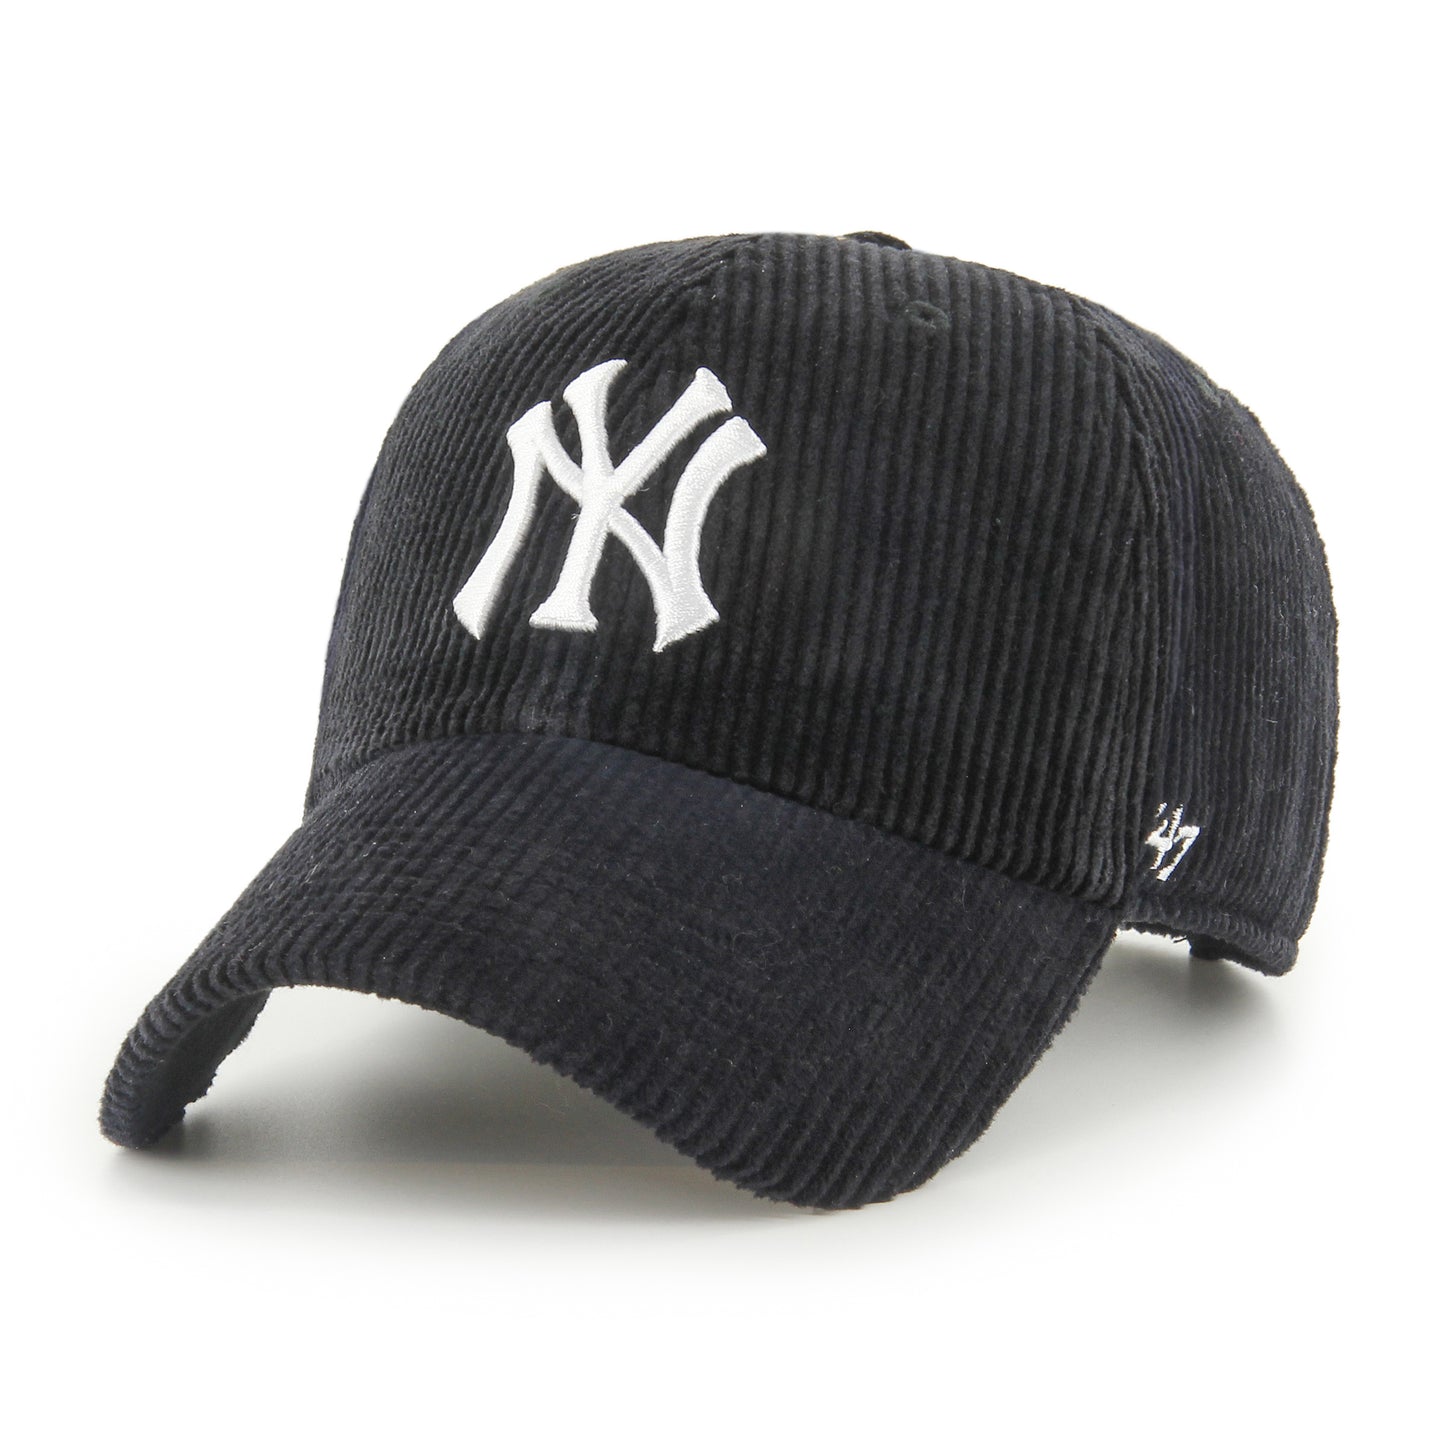 MLB NEW YORK YANKEES THICK CORD 47 CLEAN UP BLACK